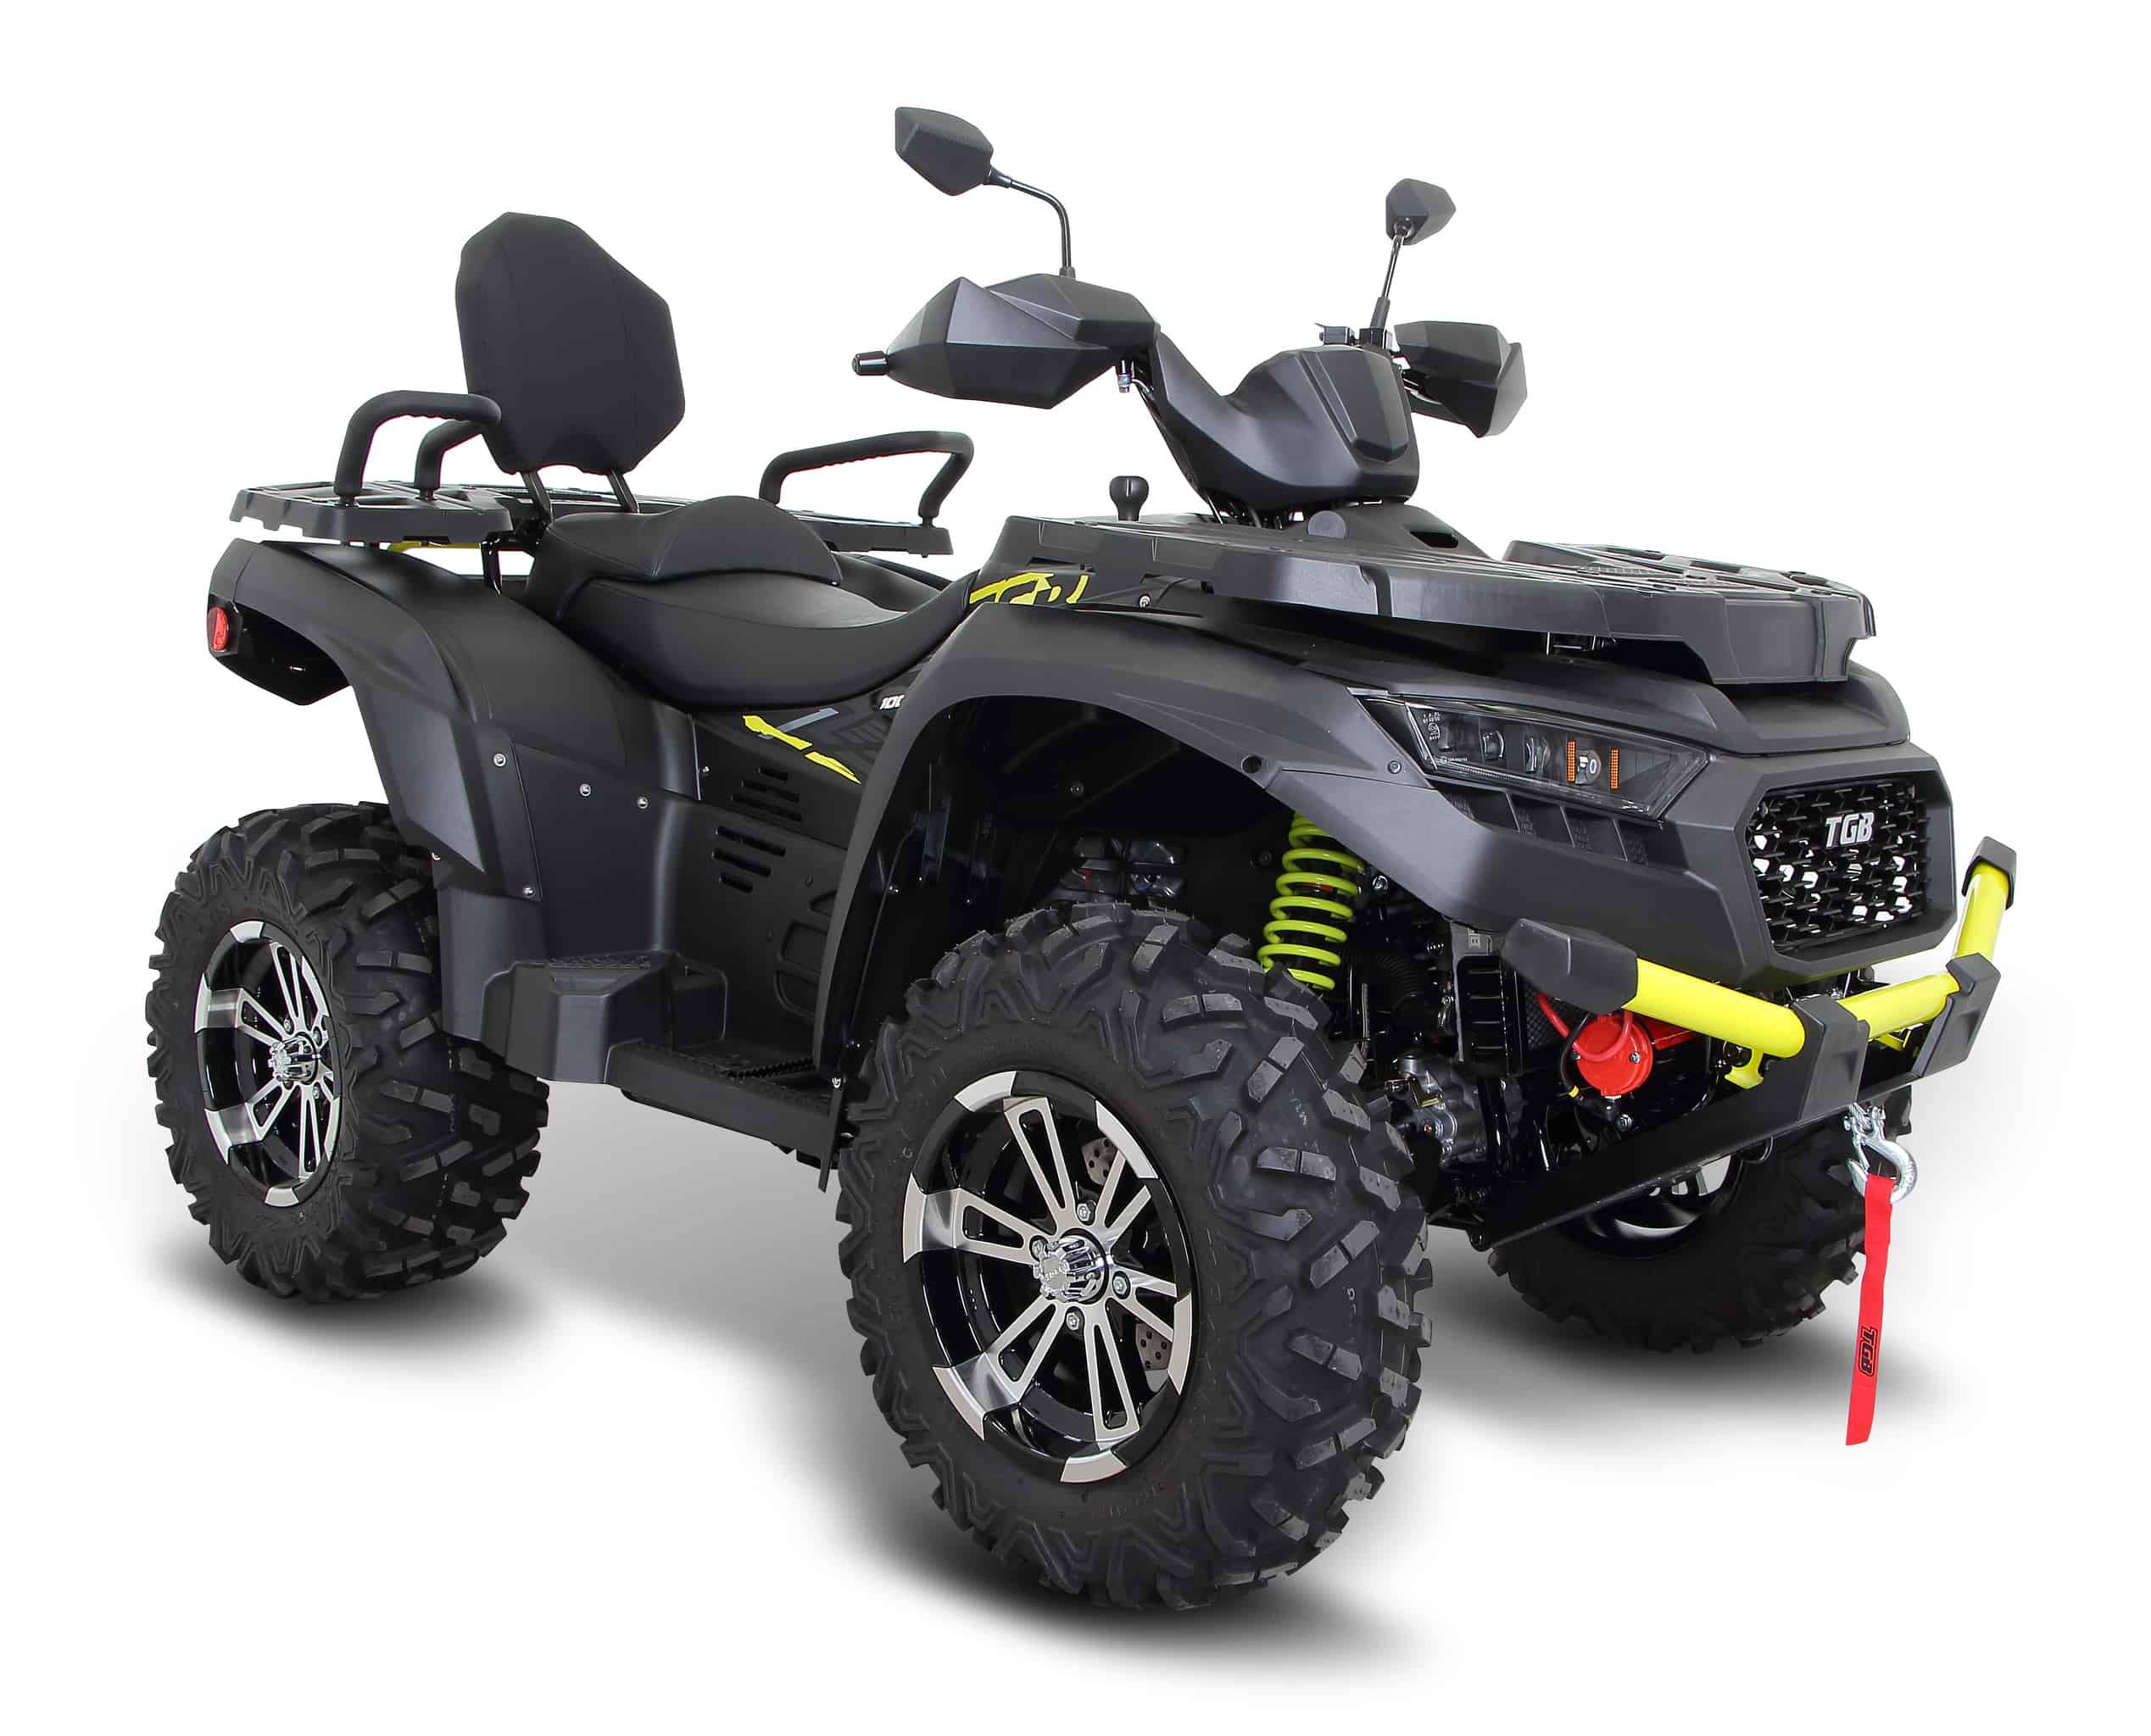 Ultimate in ATV technology